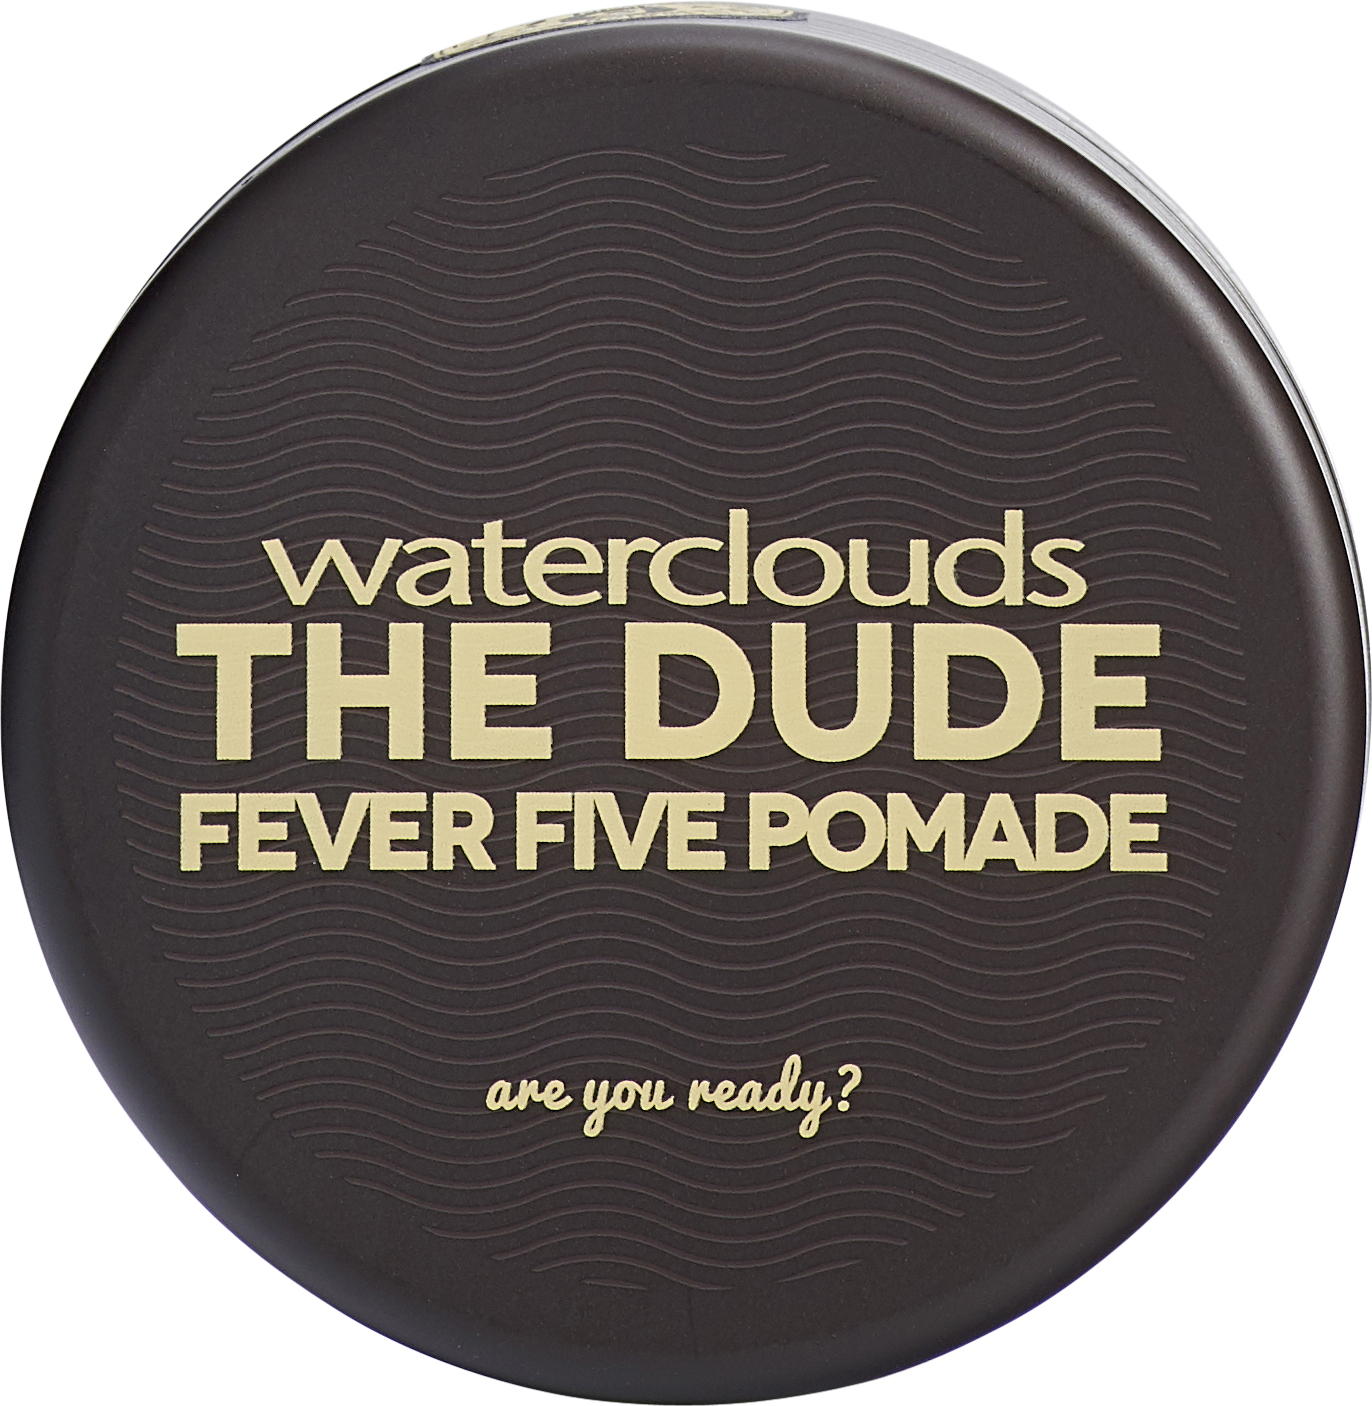 Waterclouds The Dude Fever Five Pomade